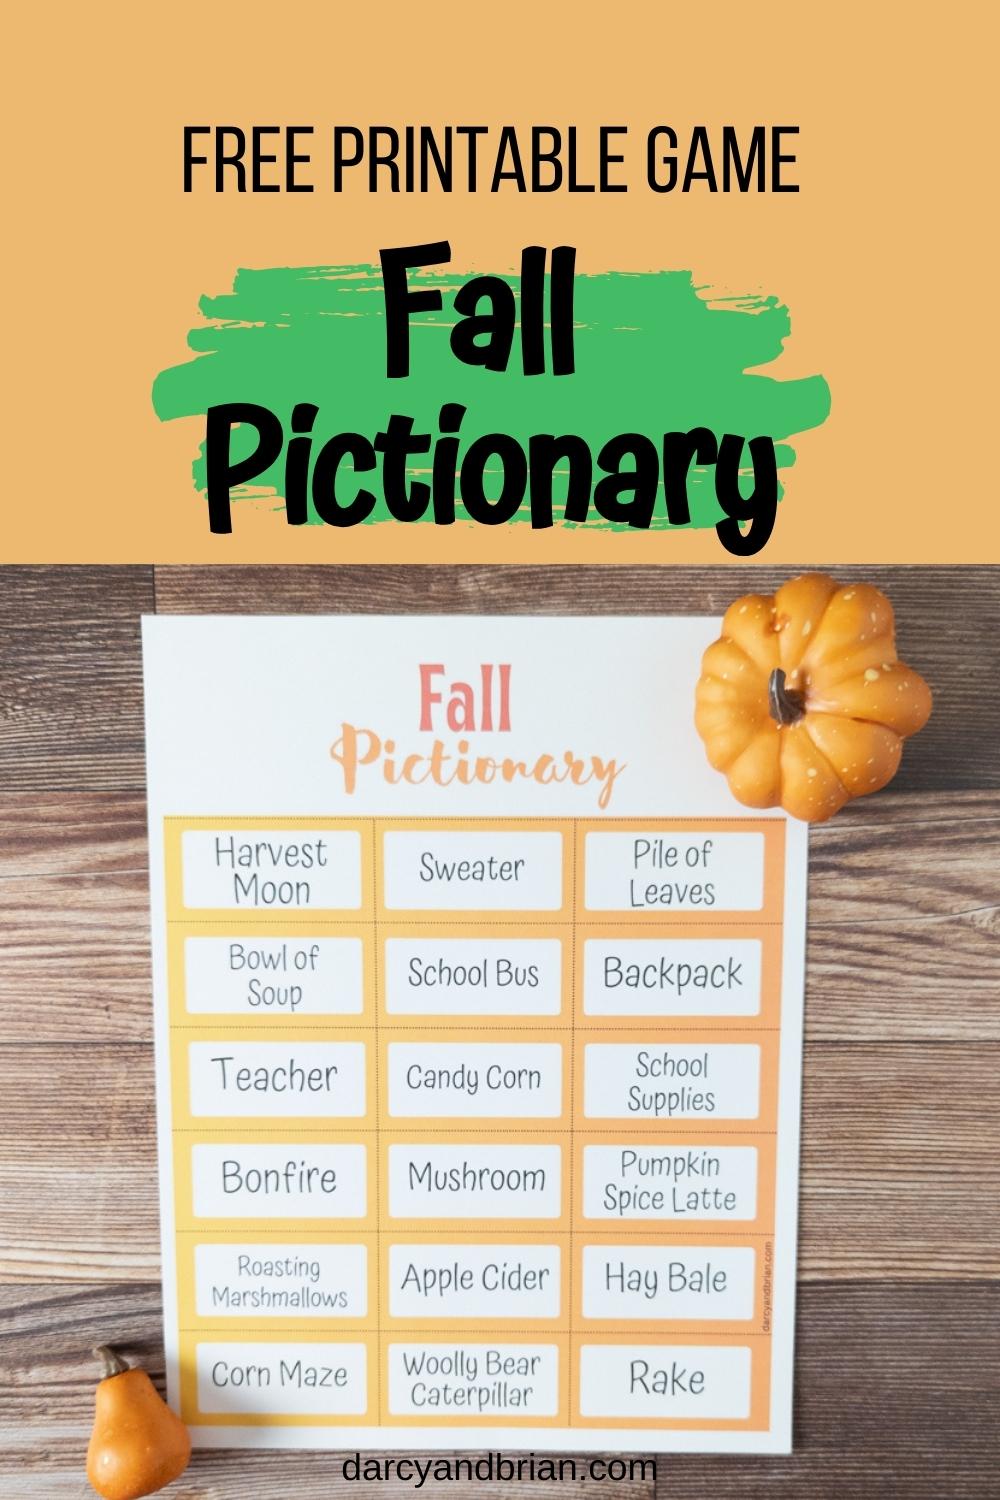 List of Pictionary words - easy difficulty  Pictionary words, Pictionary  for kids, Pictionary